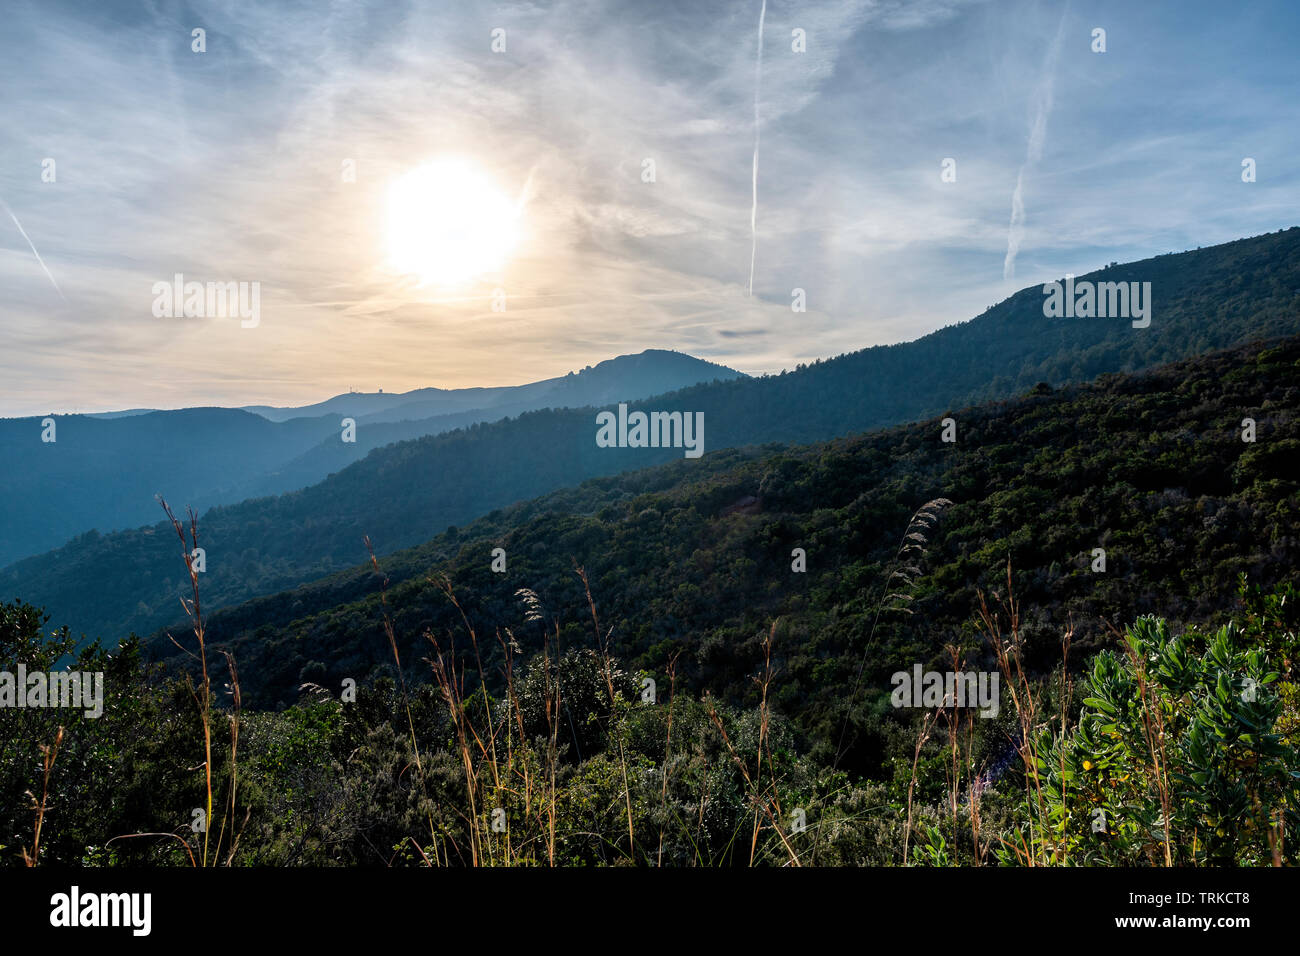 Hiking at sunset in the mountain, Catalonia Spain Stock Photo